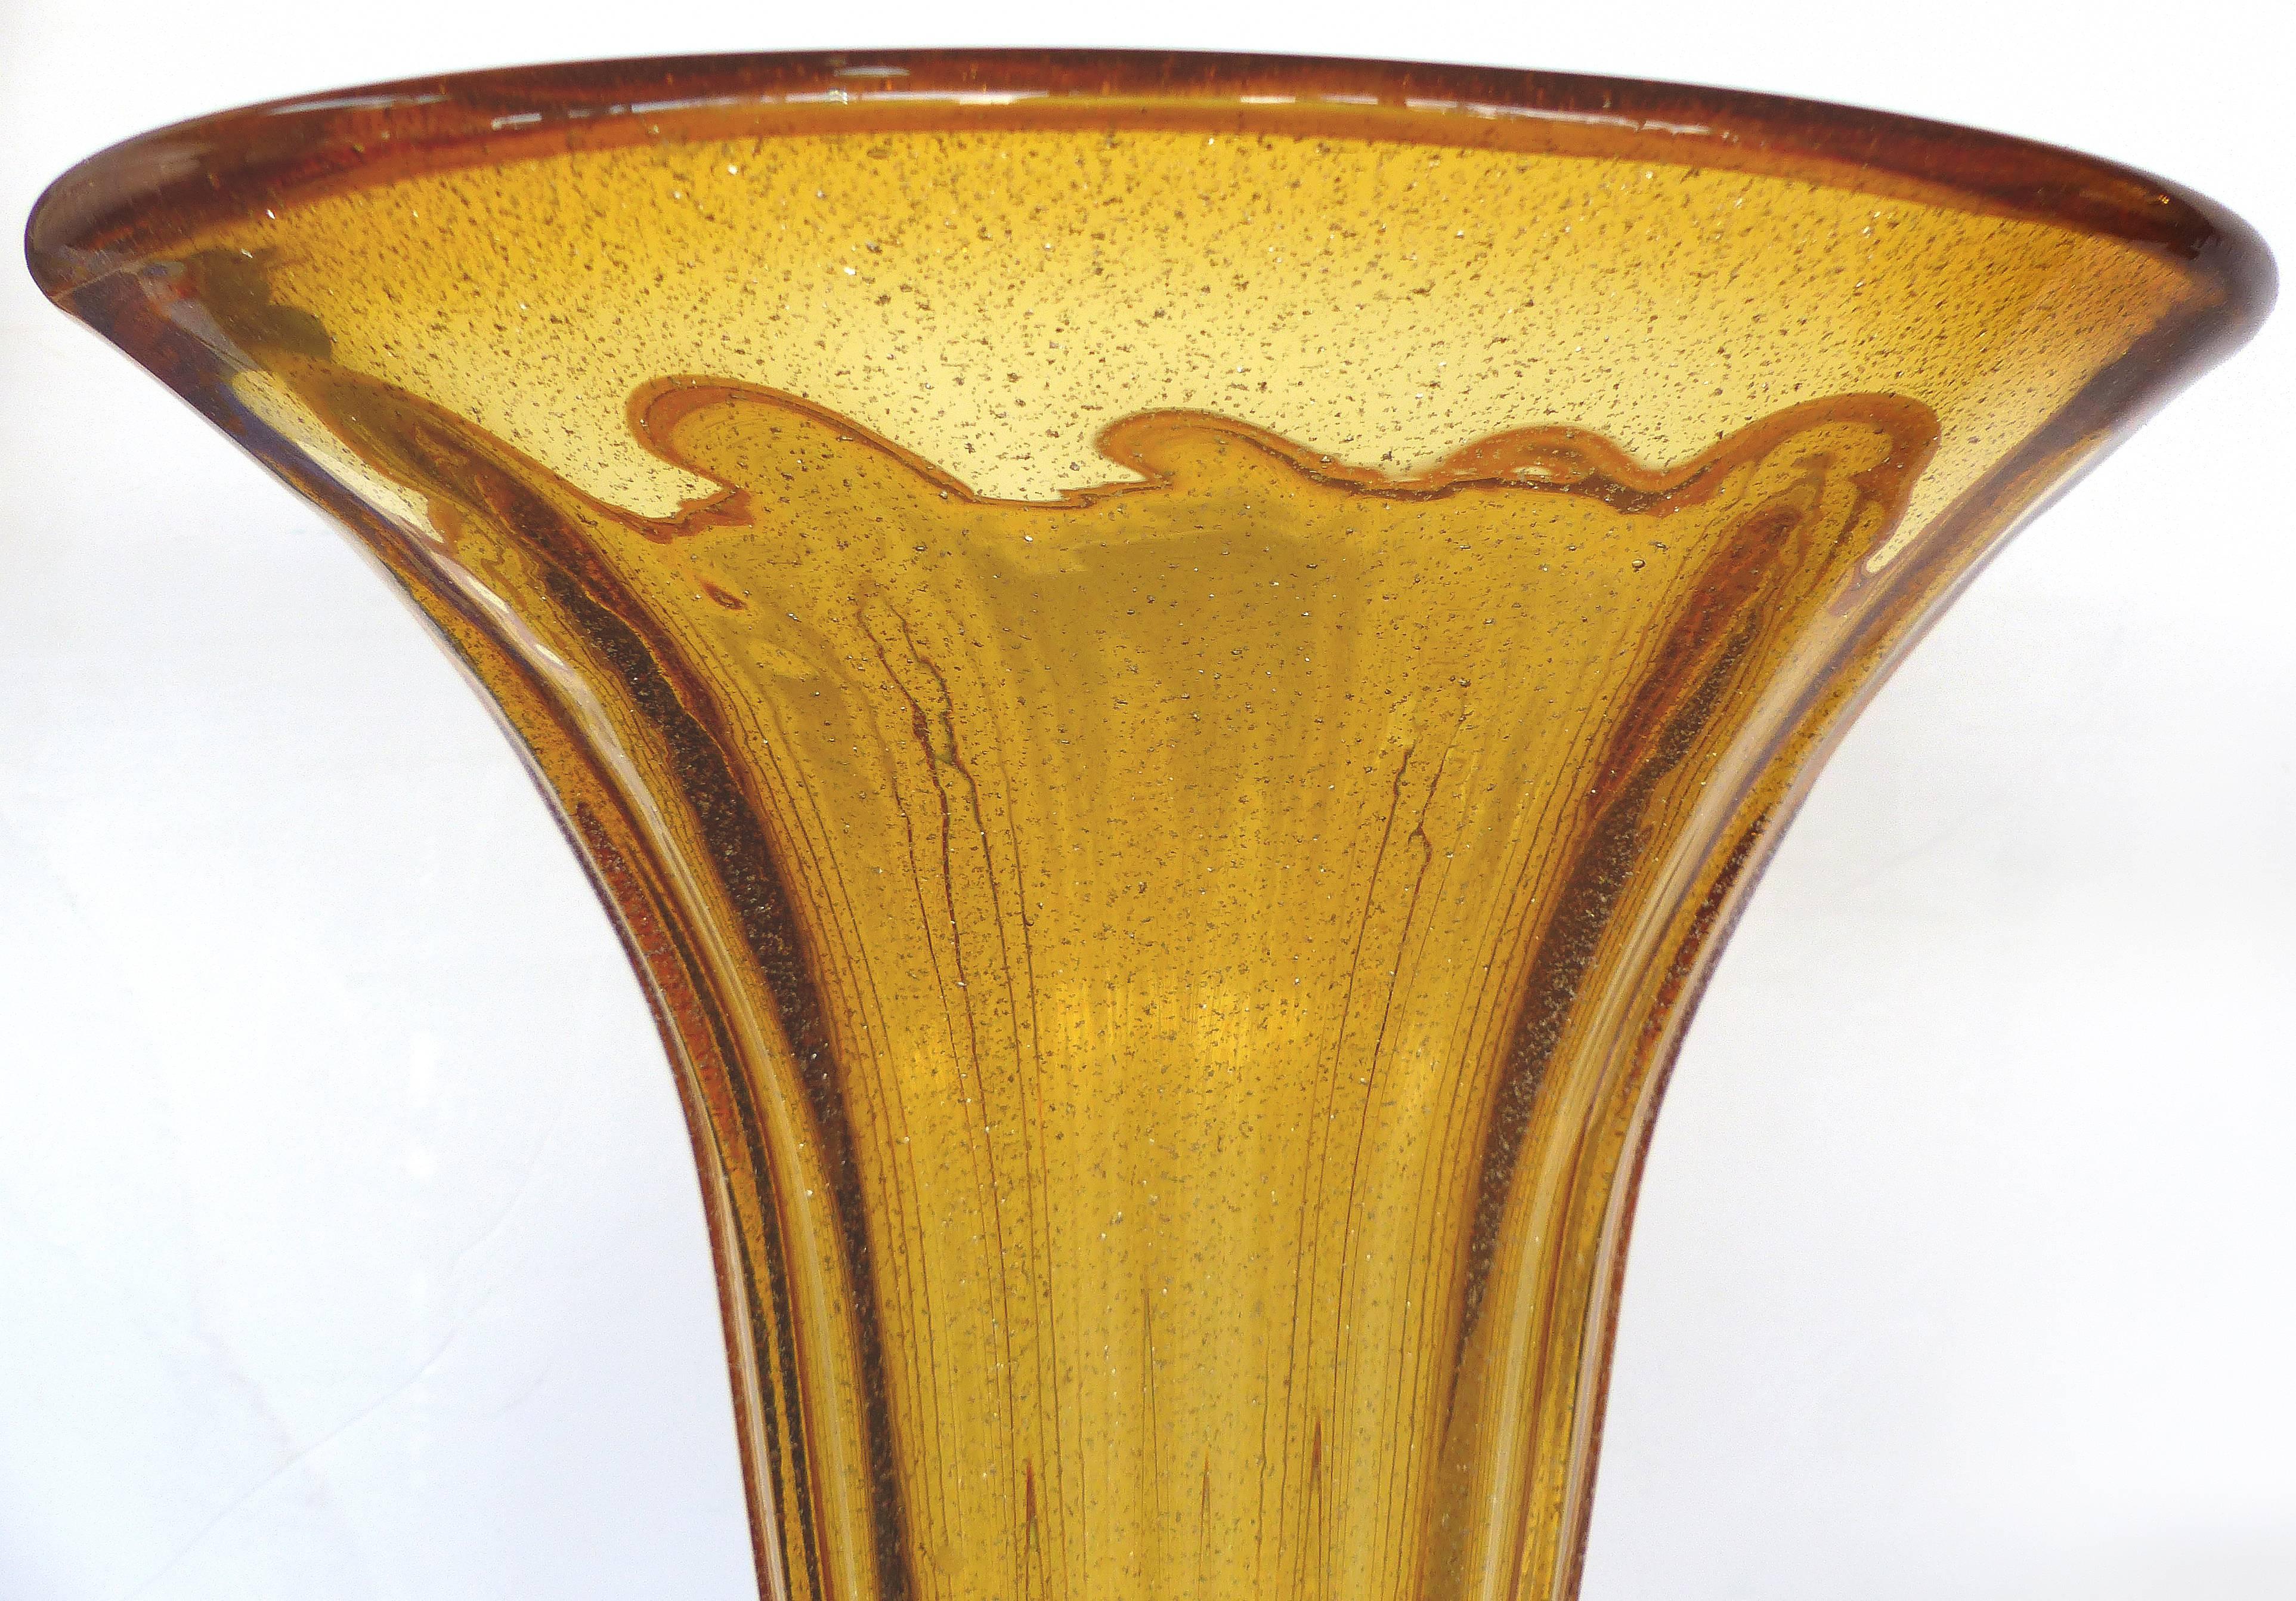 Monumental Pair of Blown Murano Glass Urns with Infused Gold Flakes

A monumental pair of gold infused handblown Murano glass footed urns. Each flared top urn is supported by a decorative gold infused stem and contrasting amber base. Base, 5